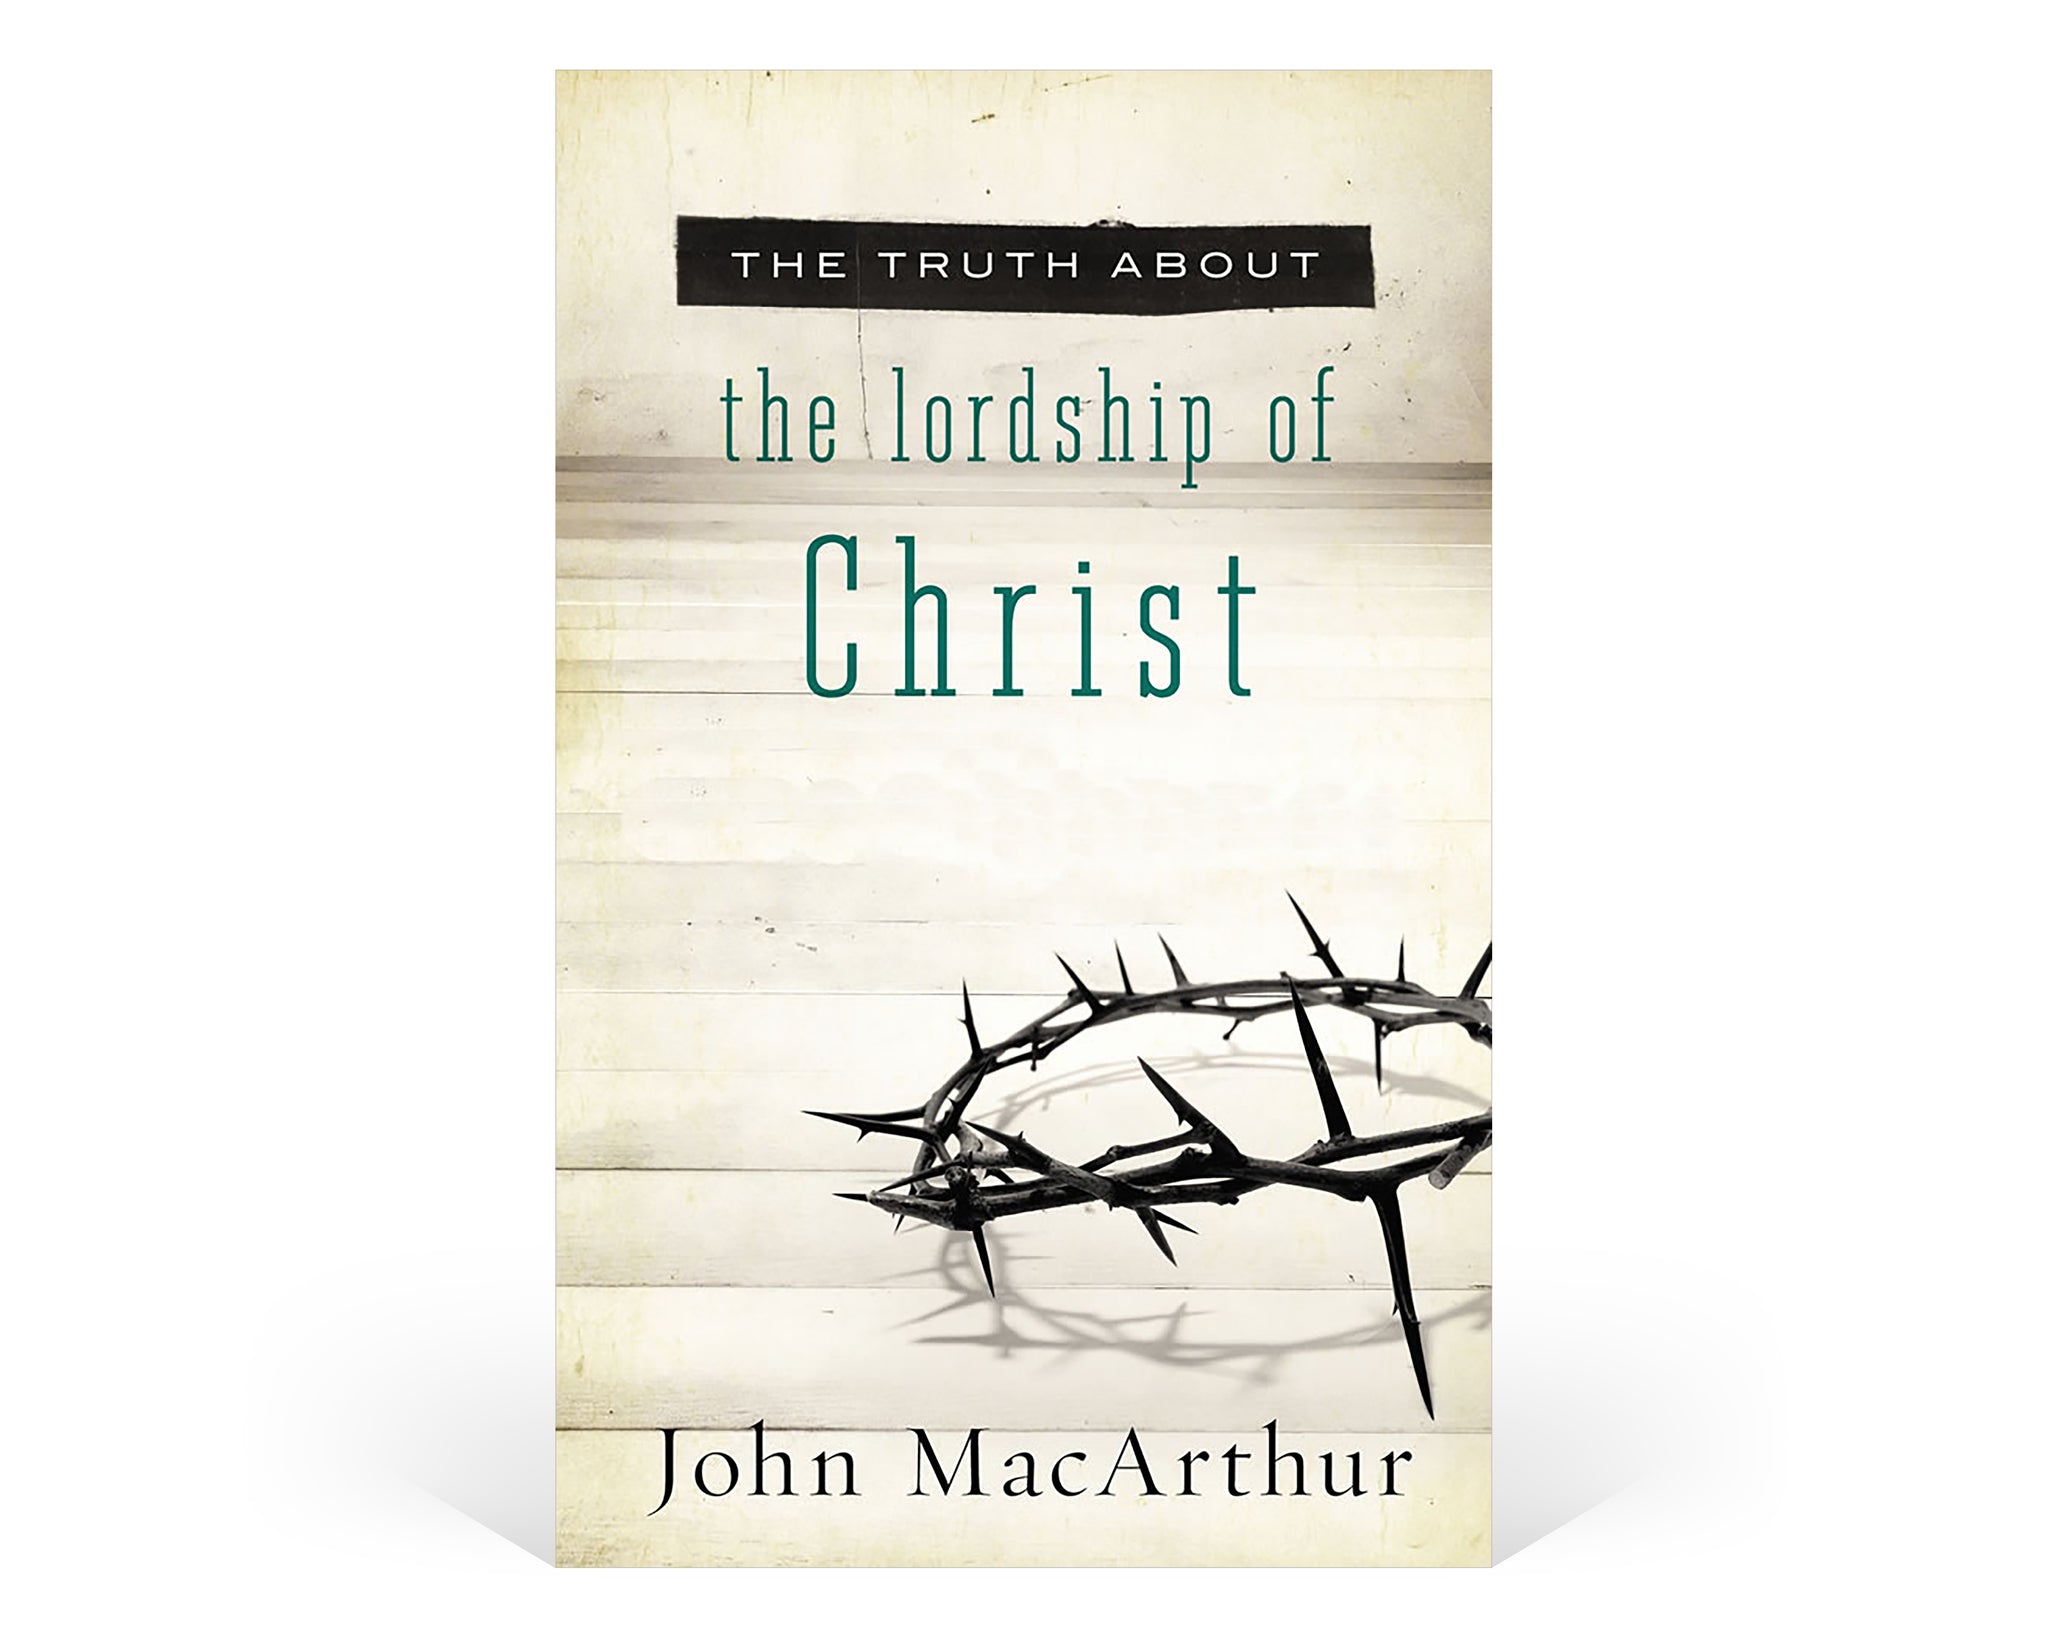 The Truth About the Lordship of Christ